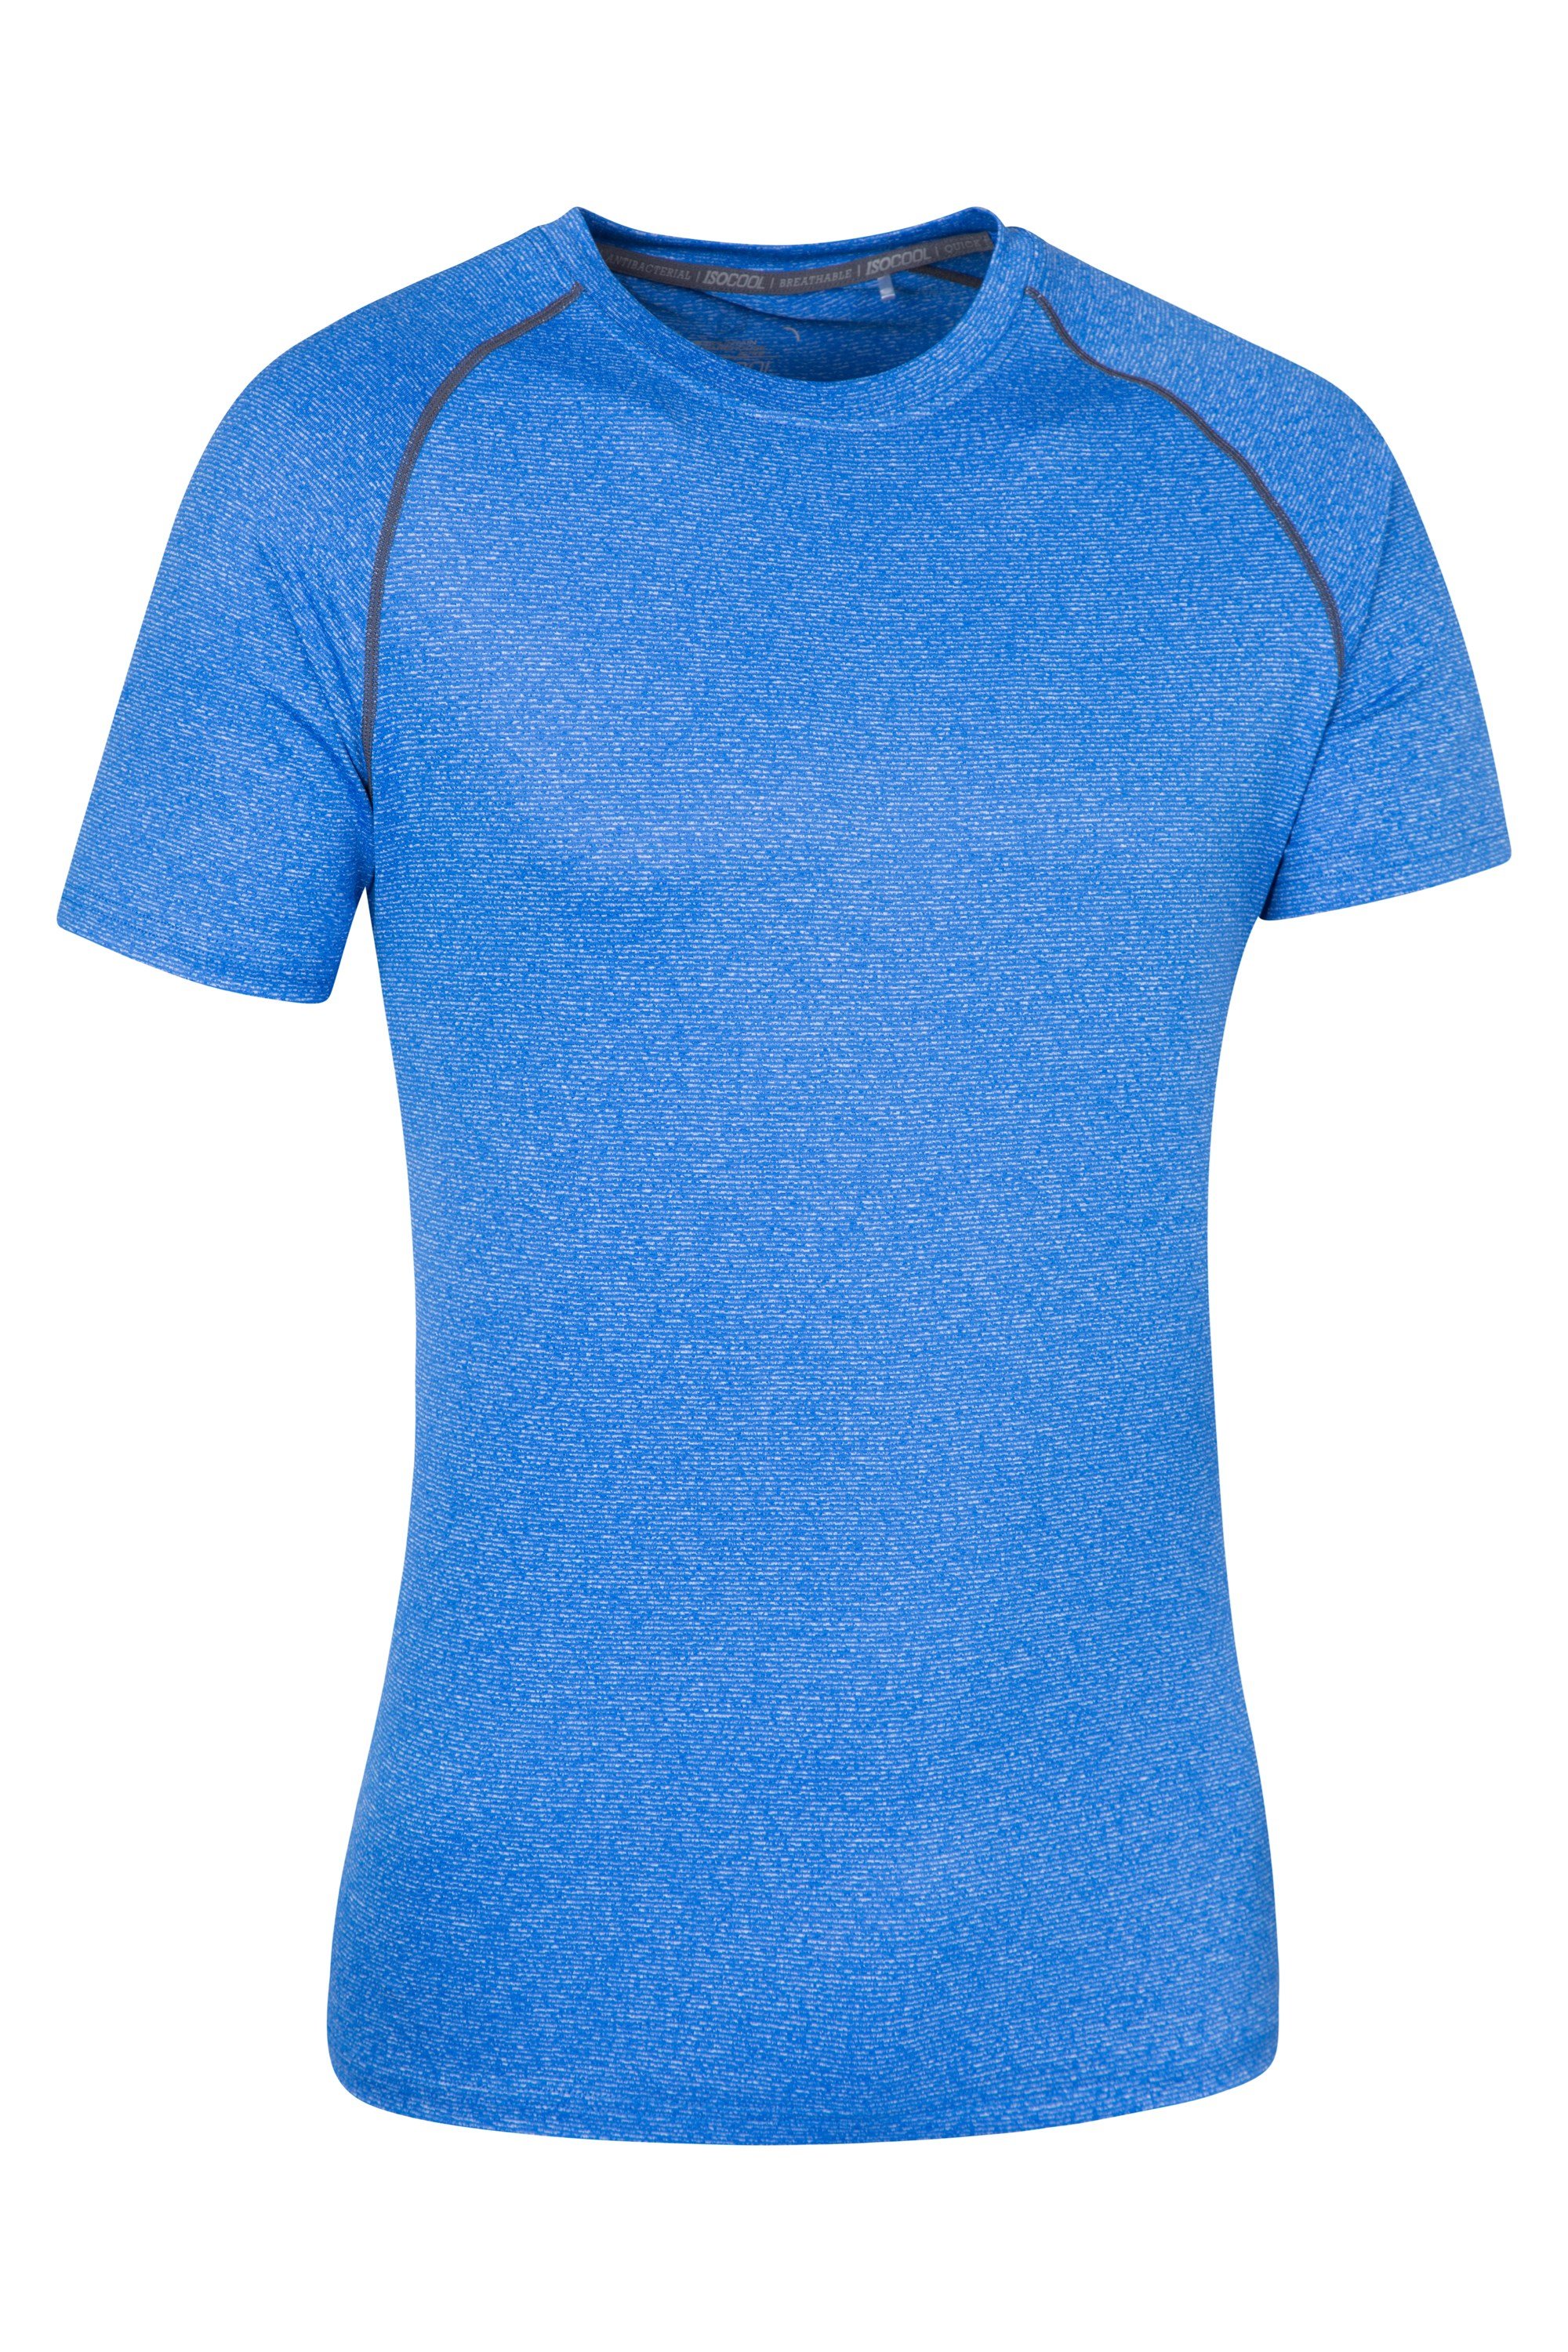 Sports Lightweight T-Shirt Outdoors Warm Tee Shirt Cosy Mountain Warehouse Cosmo Mens IsoCool Tee UV Sweat Wicking Top for Gym